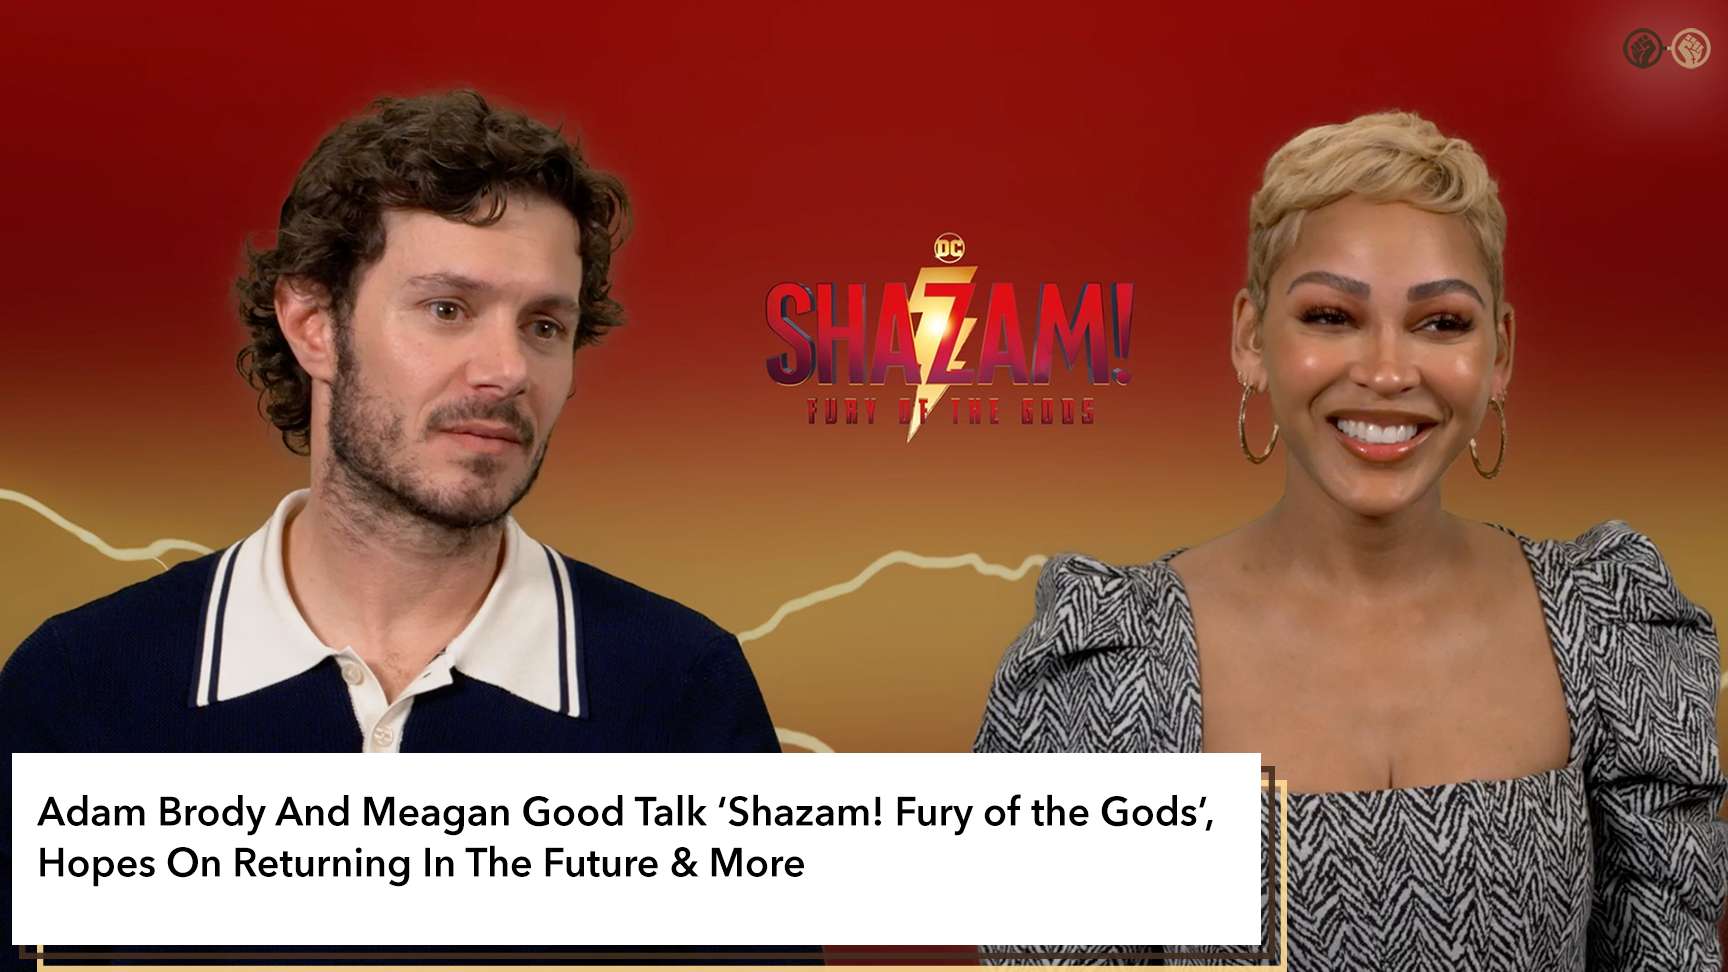 Adam Brody And Meagan Good Talk ‘Shazam! Fury of the Gods’, Hopes On Returning In The Future & More – Interview